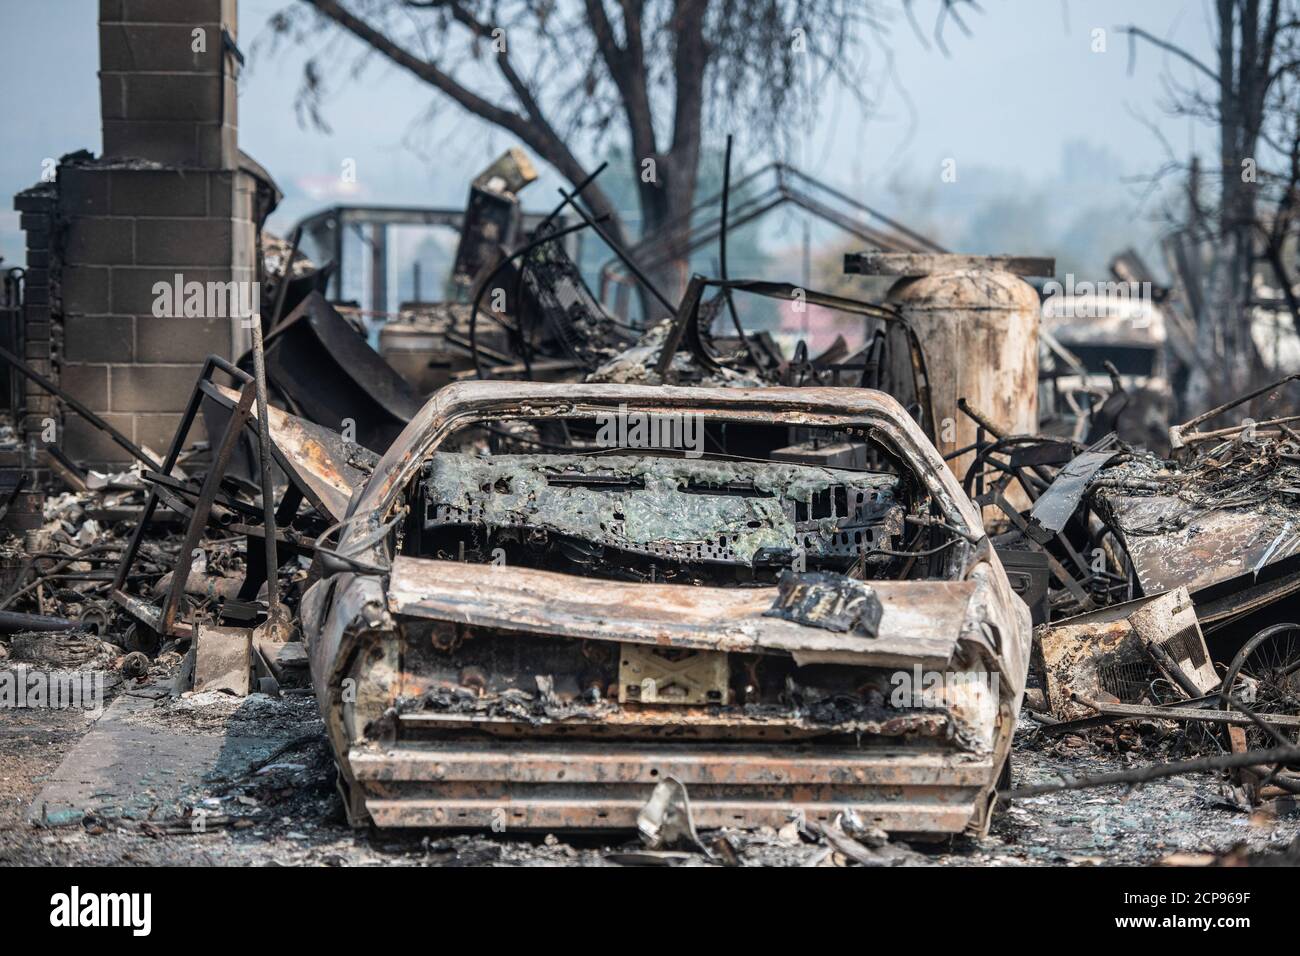 Talent, Ore. 18th Sep, 2020. A general view of a burned out vehicle amid the aftermath of the Almeda Fire. The town of Talent, Oregon, showing the burned out homes, cars and rubble left behind. In Talent, about 20 miles north of the California border, homes were charred beyond recognition. Across the western US, at least 87 wildfires are burning, according to the National Interagency Fire Center. They've torched more than 4.7 million acres -- more than six times the area of Rhode Island. Credit: Chris Tuite/Image Space/Media Punch/Alamy Live News Stock Photo